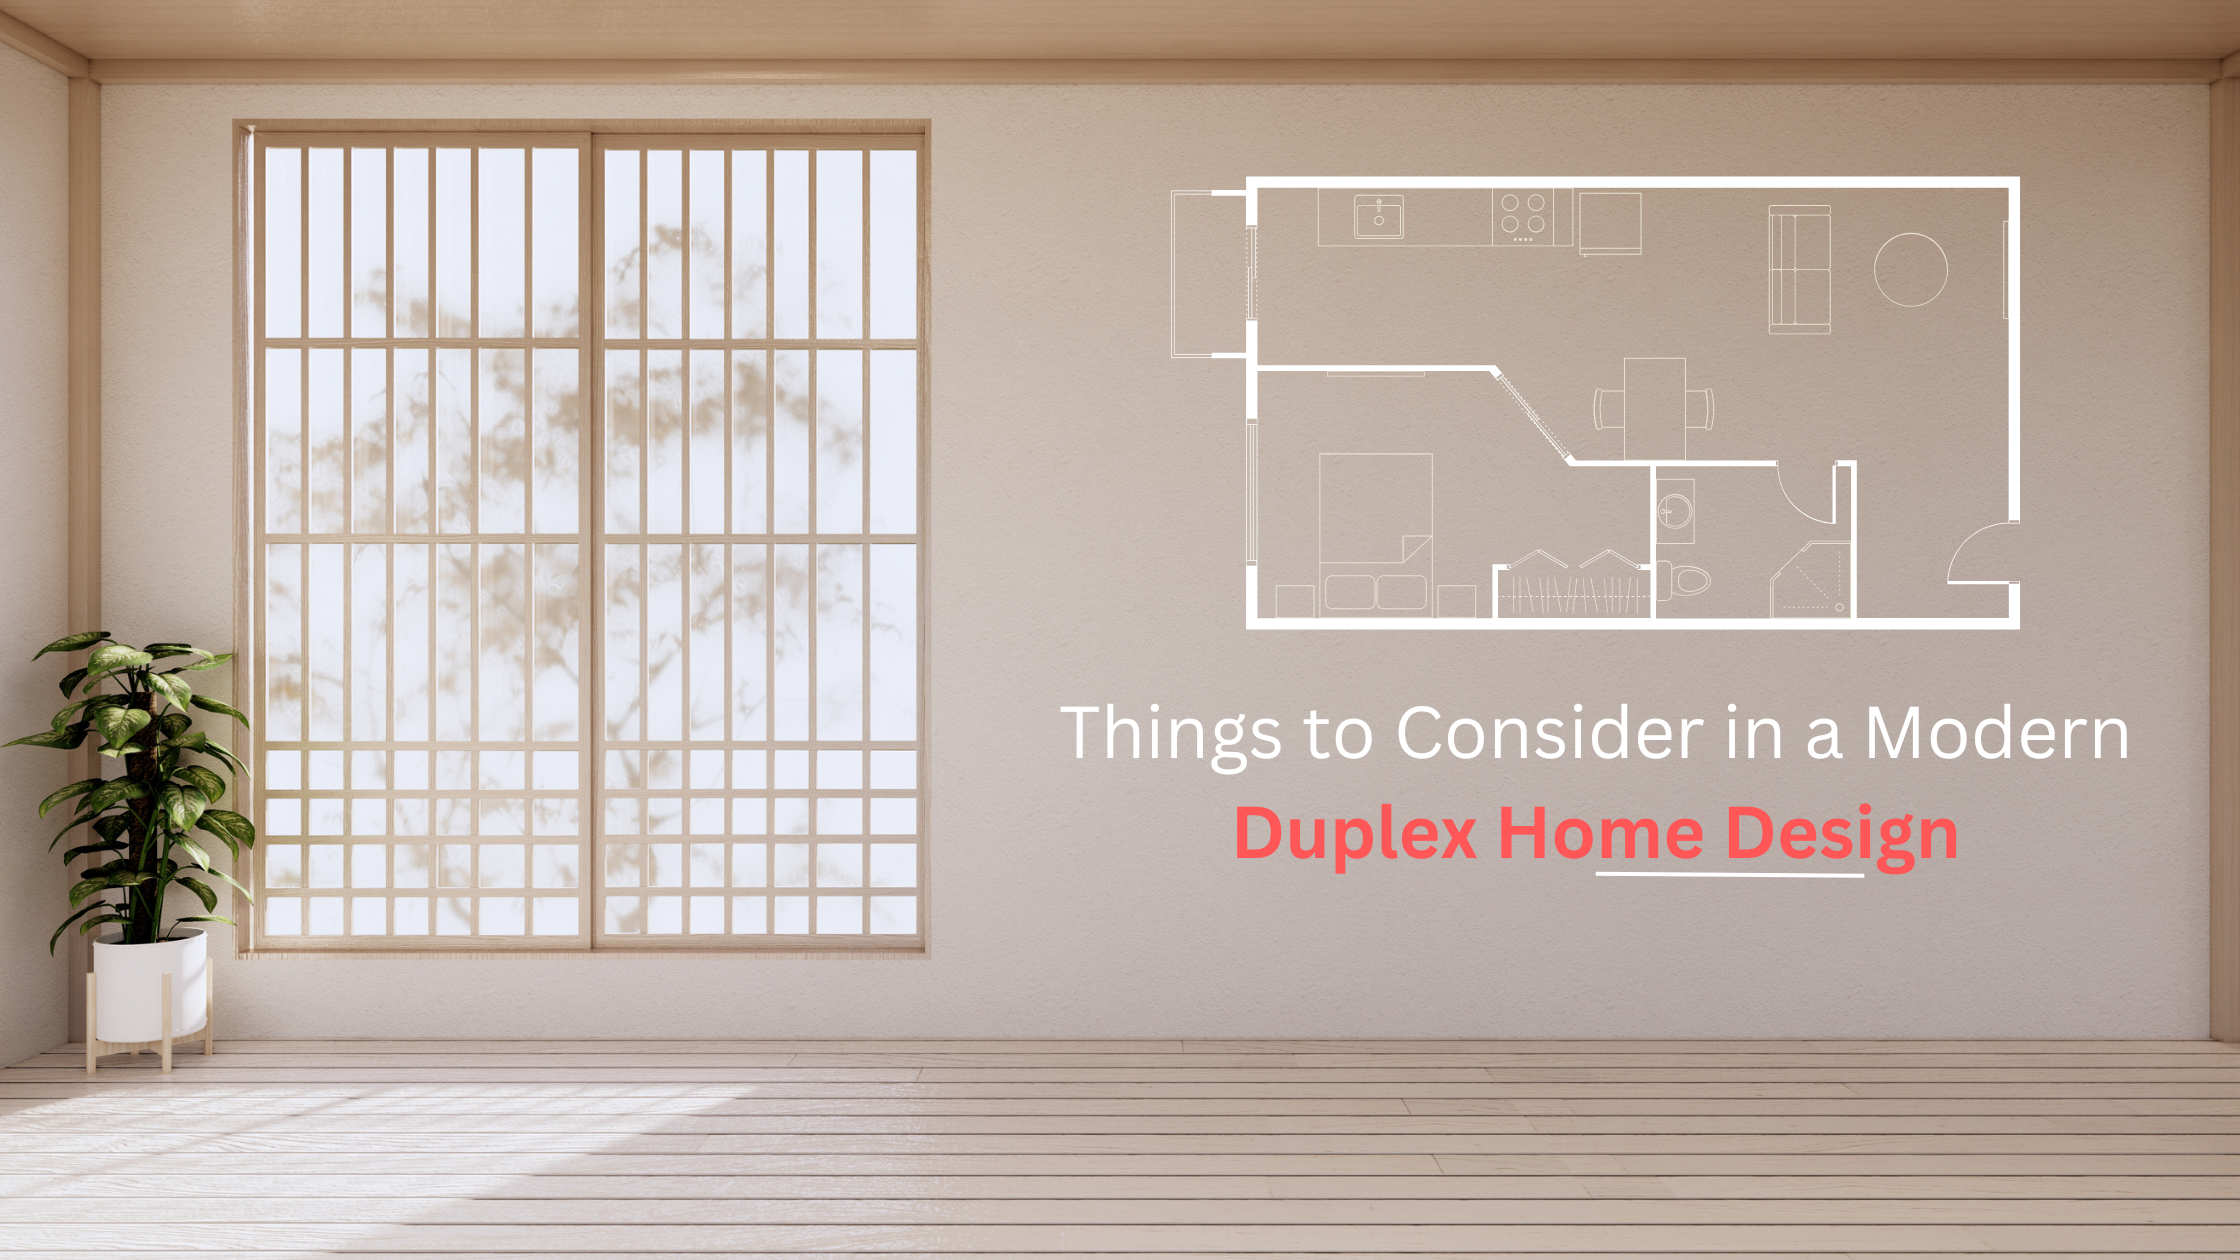 Things to Consider in a Modern Duplex Home Design